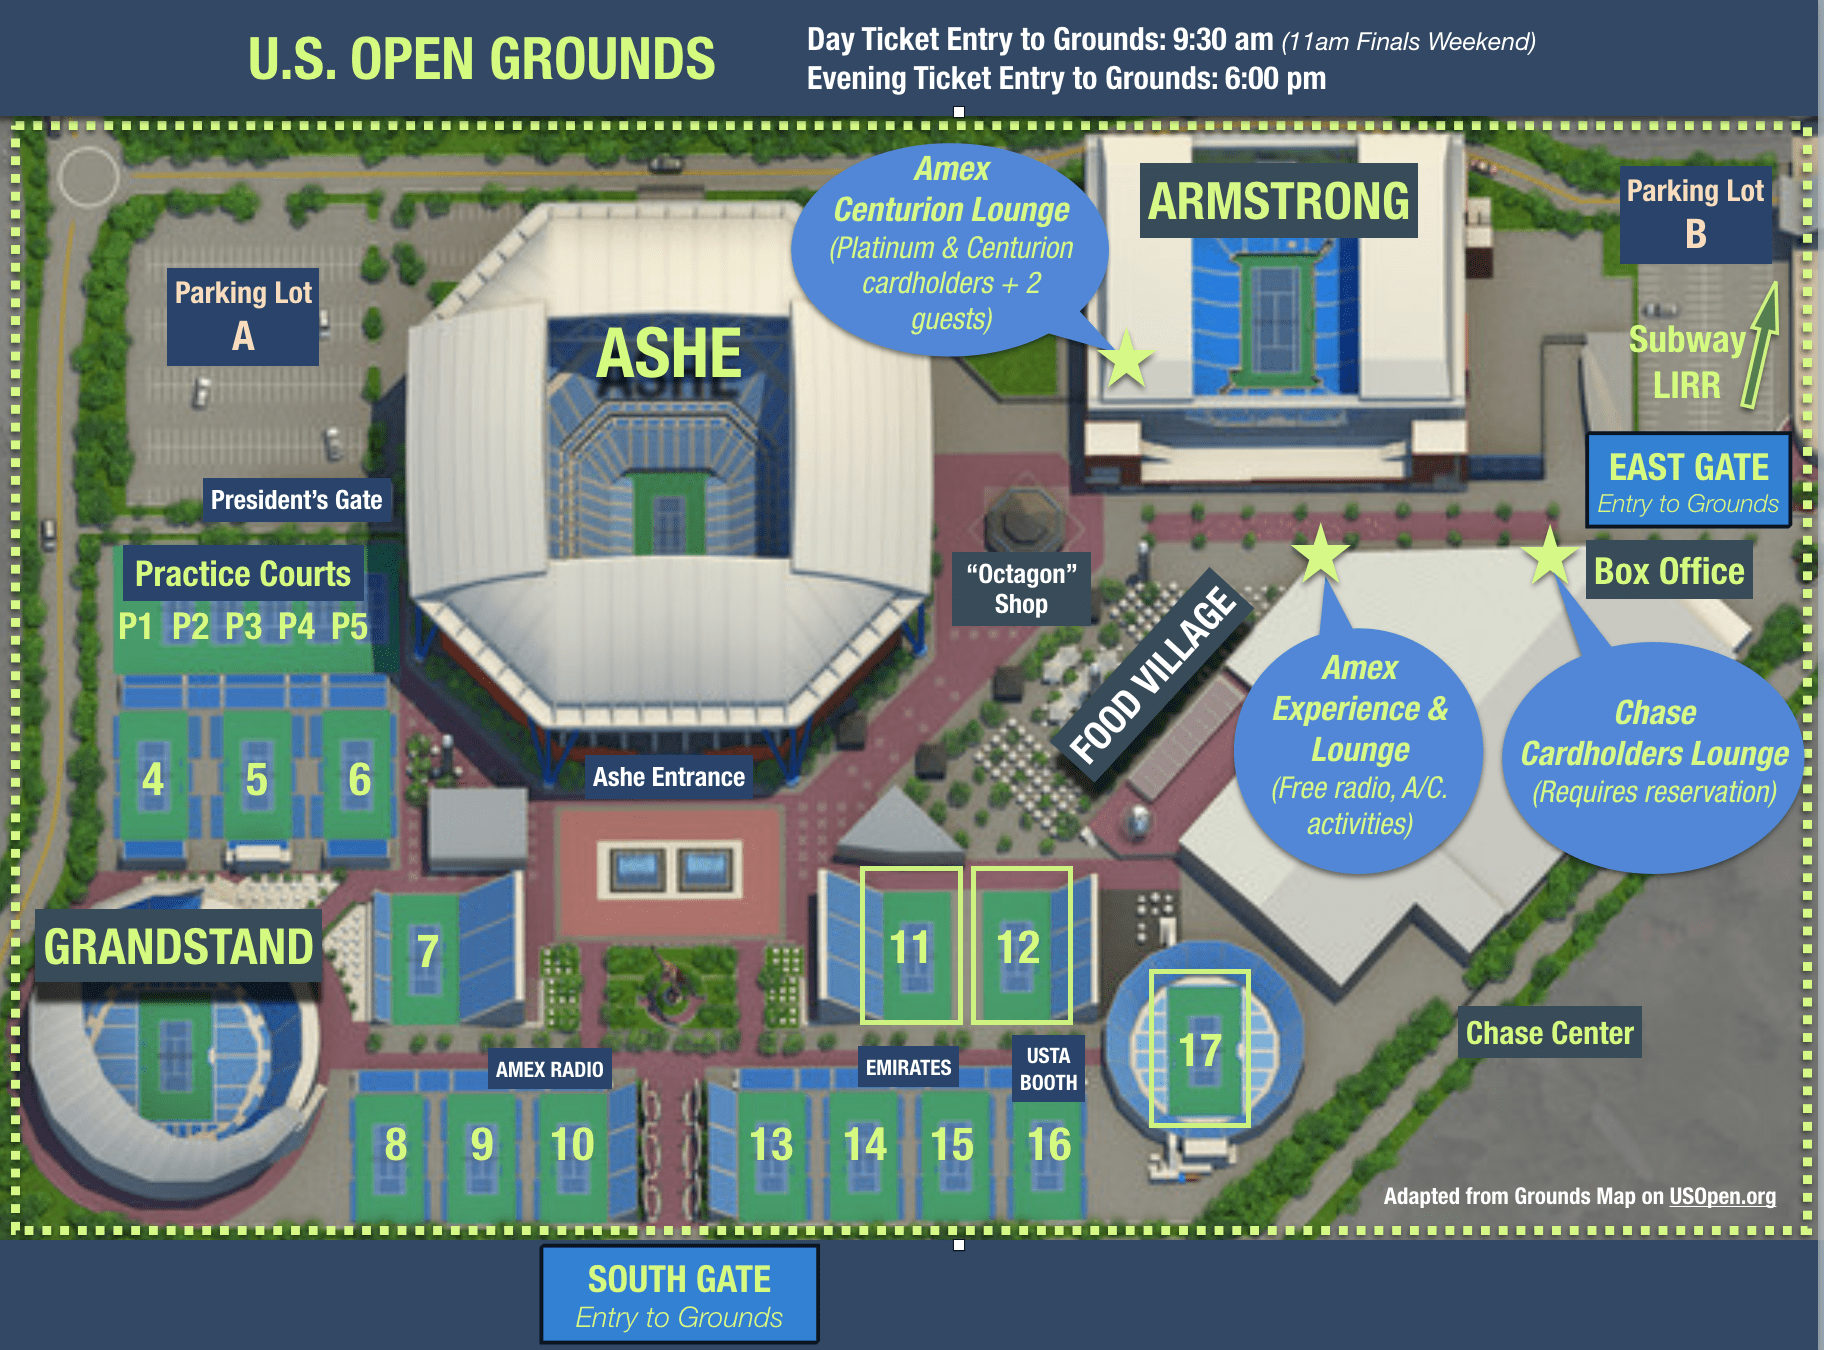 American Express Preferred Seating Code Us Open | Awesome Home